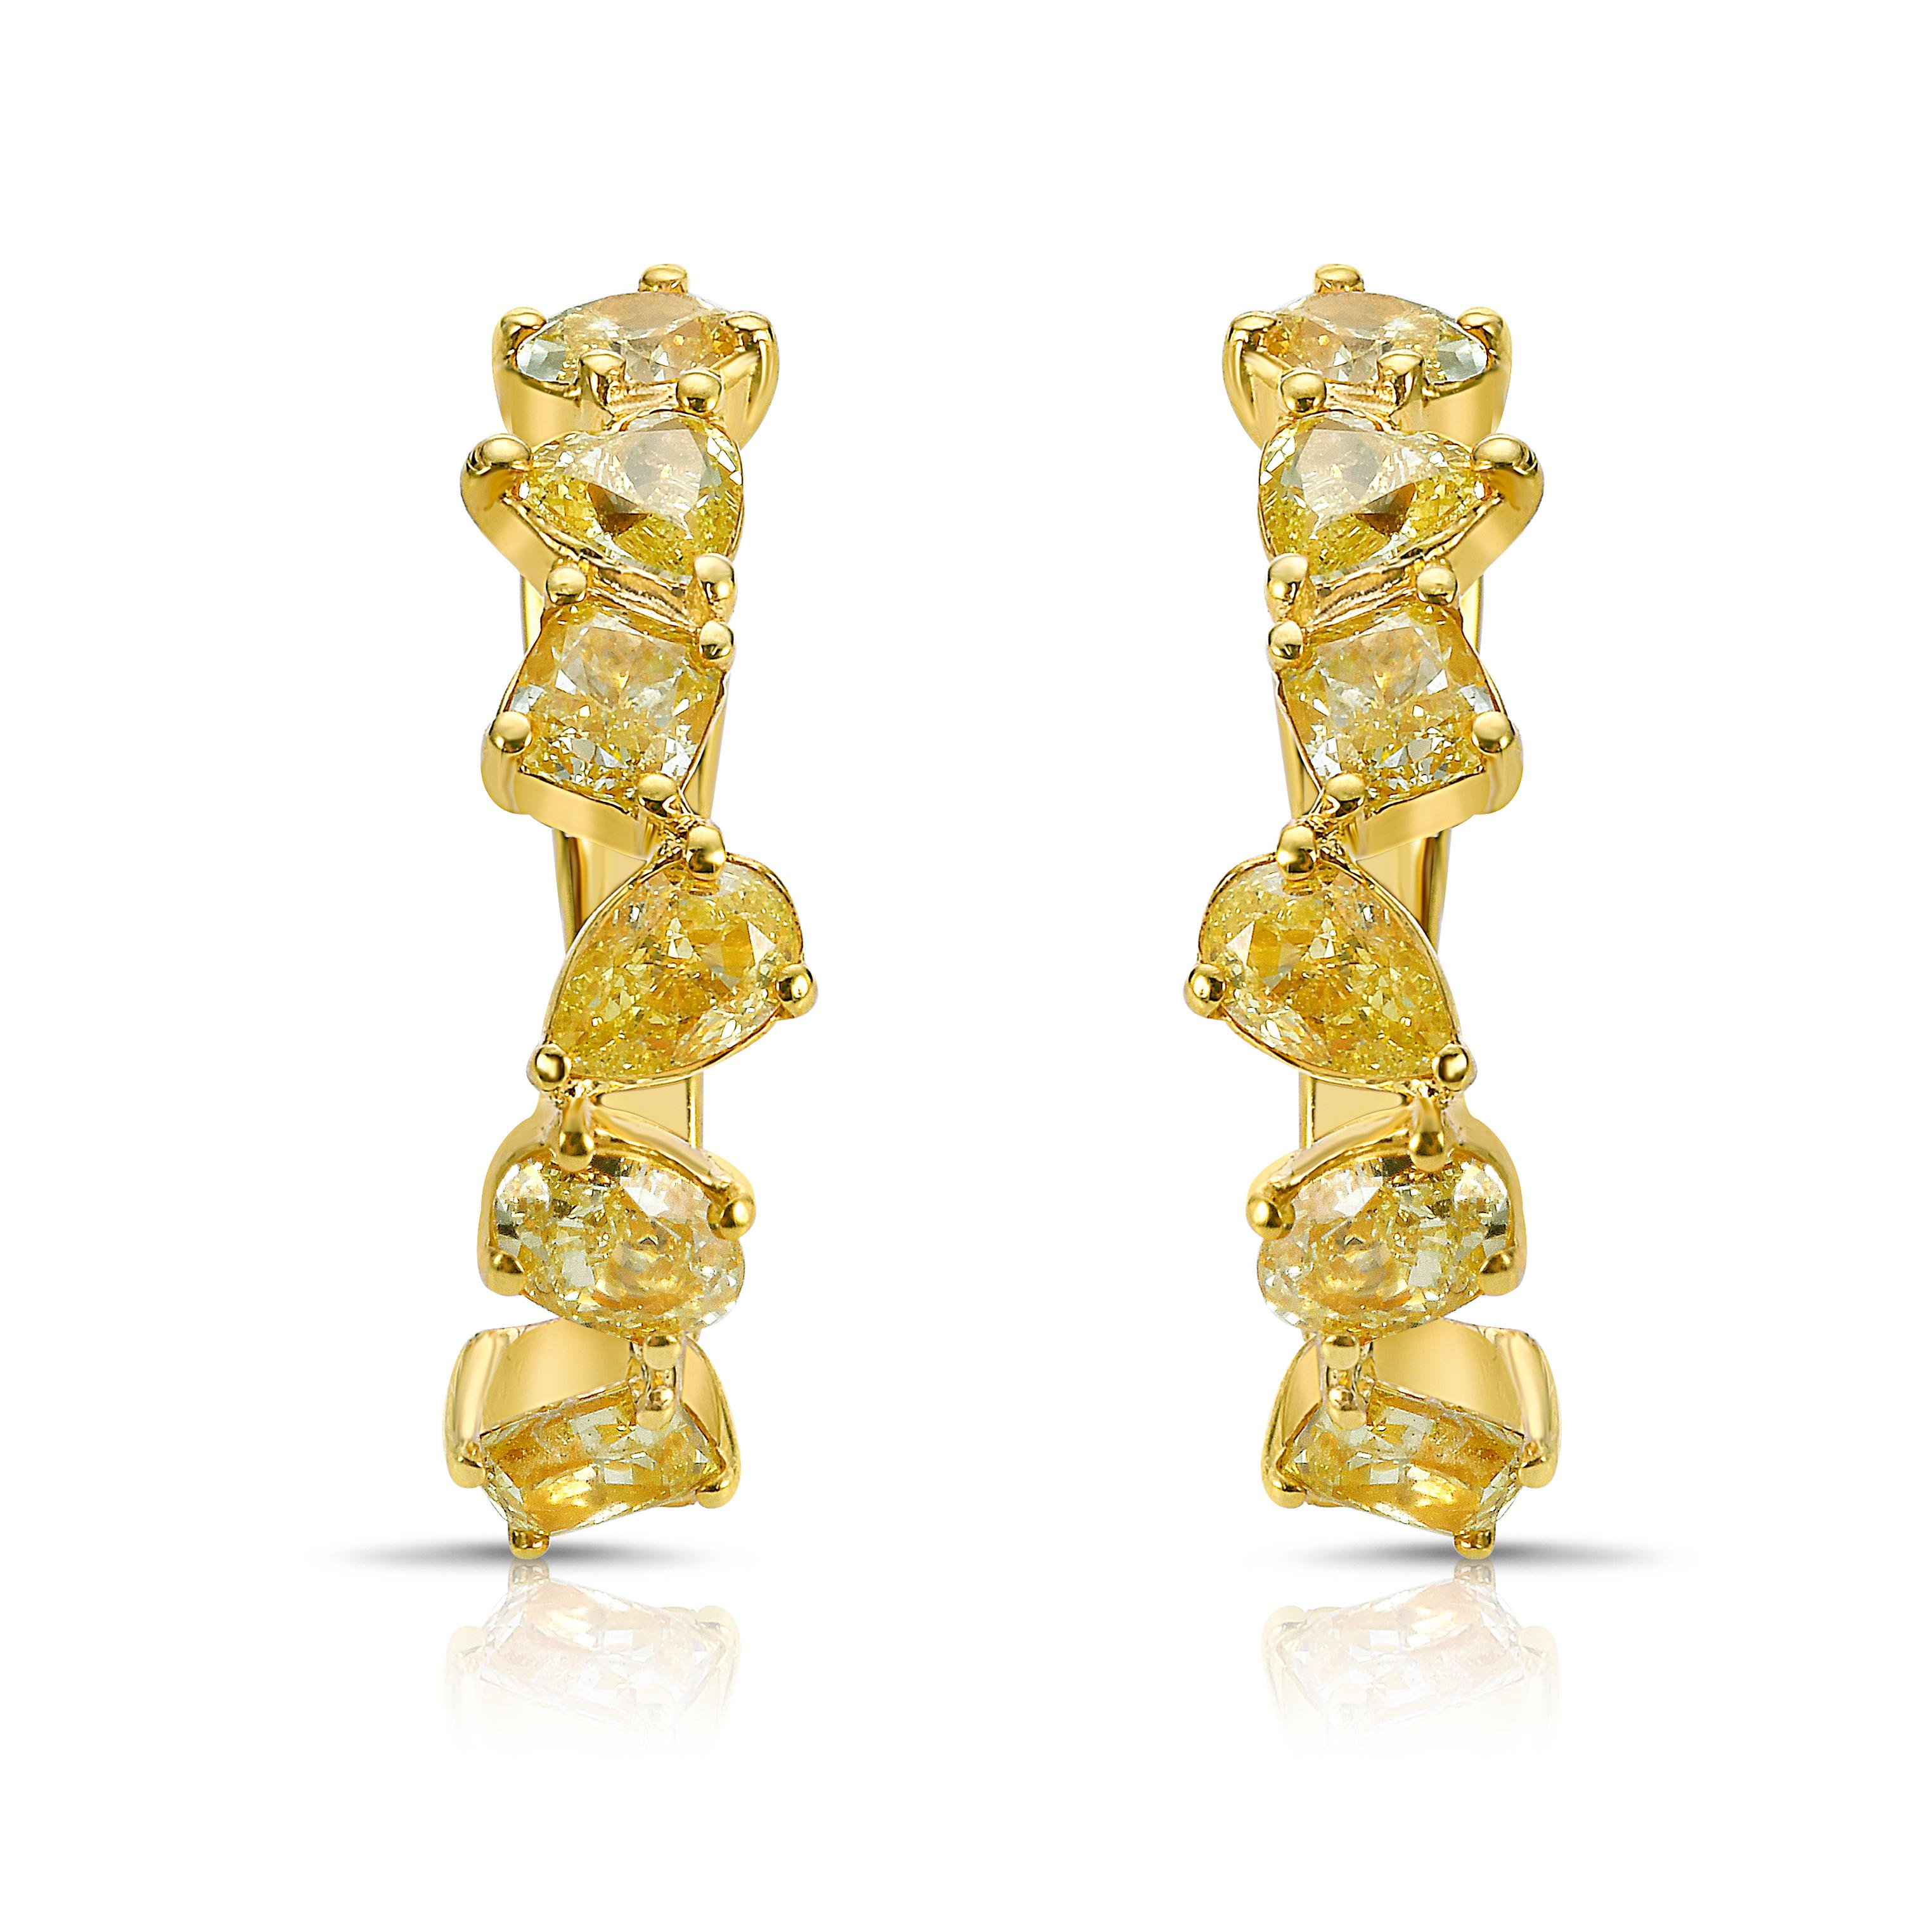 2.55 Carat Total Weight
Intense Yellow Diamonds
Mixed Shape Diamonds
Set in 18k Yellow Gold 
Handmade in NYC

This piece can be viewed before purchase in our showroom in NYC, or at one of our retail partners throughout the country, please inquire